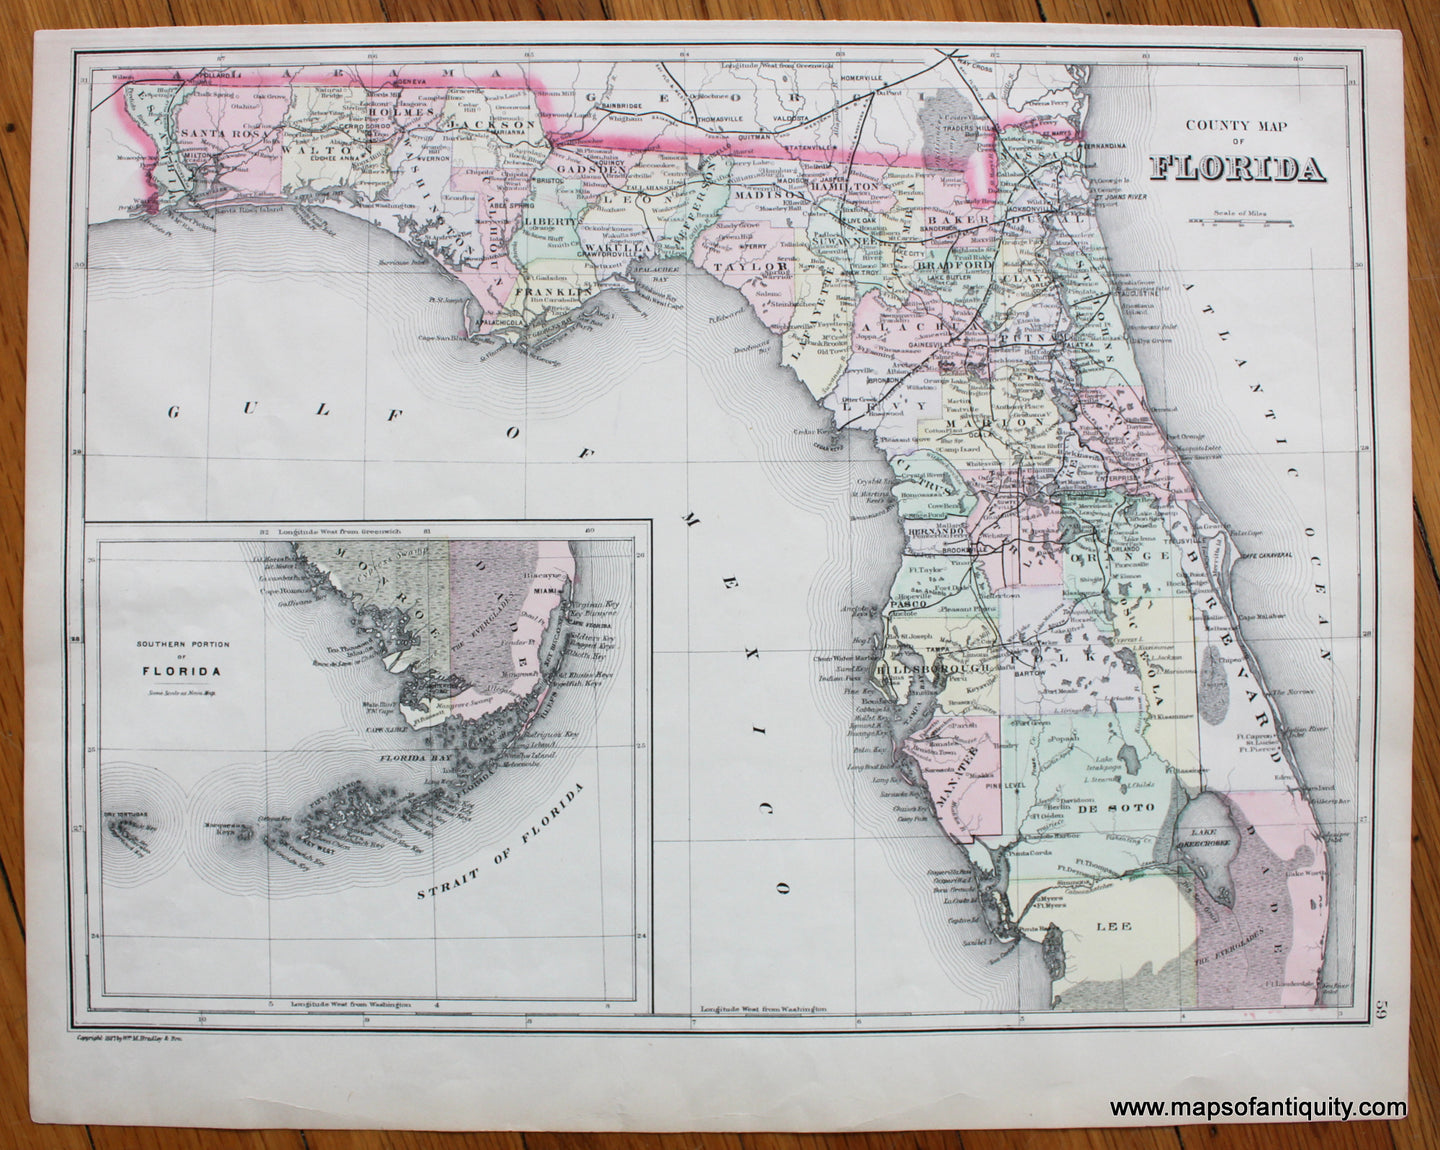 Antique-Hand-Colored-Map-County-Map-of-Florida-**********-Florida--1887-Bradley-Maps-Of-Antiquity